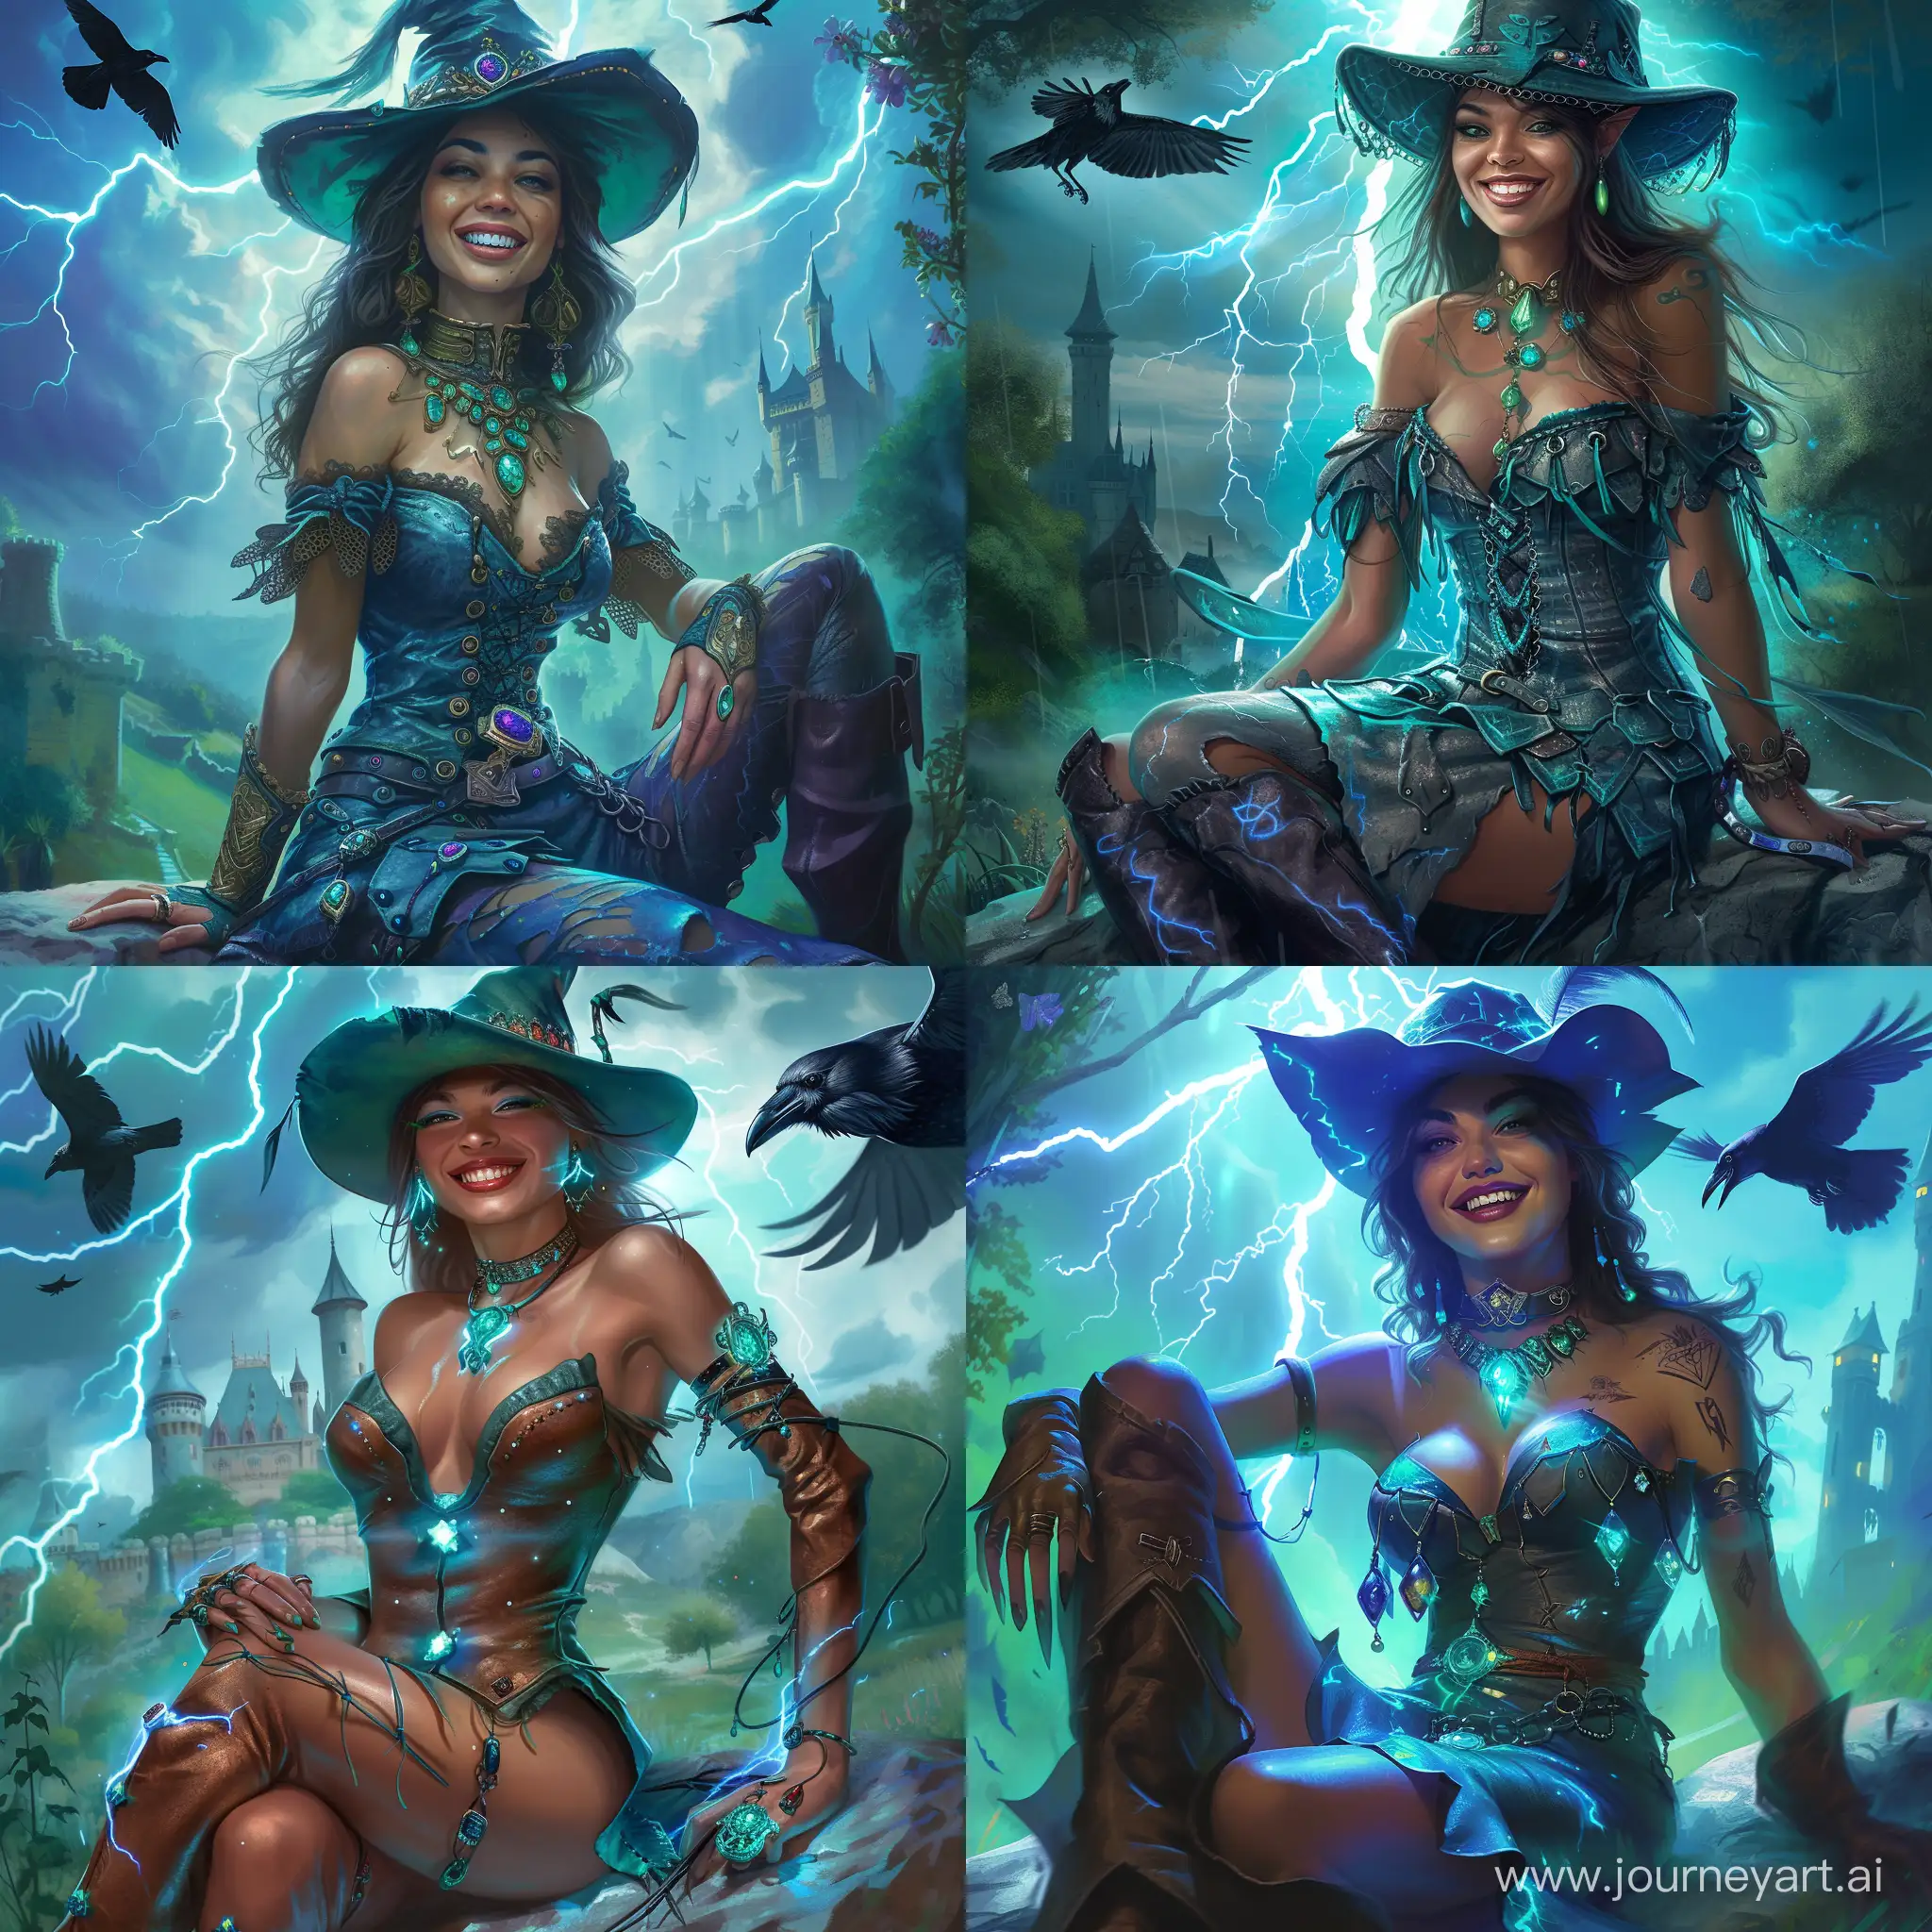 a beautiful and powerful mysterious sorceress, smile, sitting on a rock, lightning magic, hat, castle background, digital art, detailed leather clothing with gemstones, dress, elusive expression, vibrant blue and green colors, shiny smooth texture, eye level perspective, dramatic shadows, featuring a raven flying overhead”